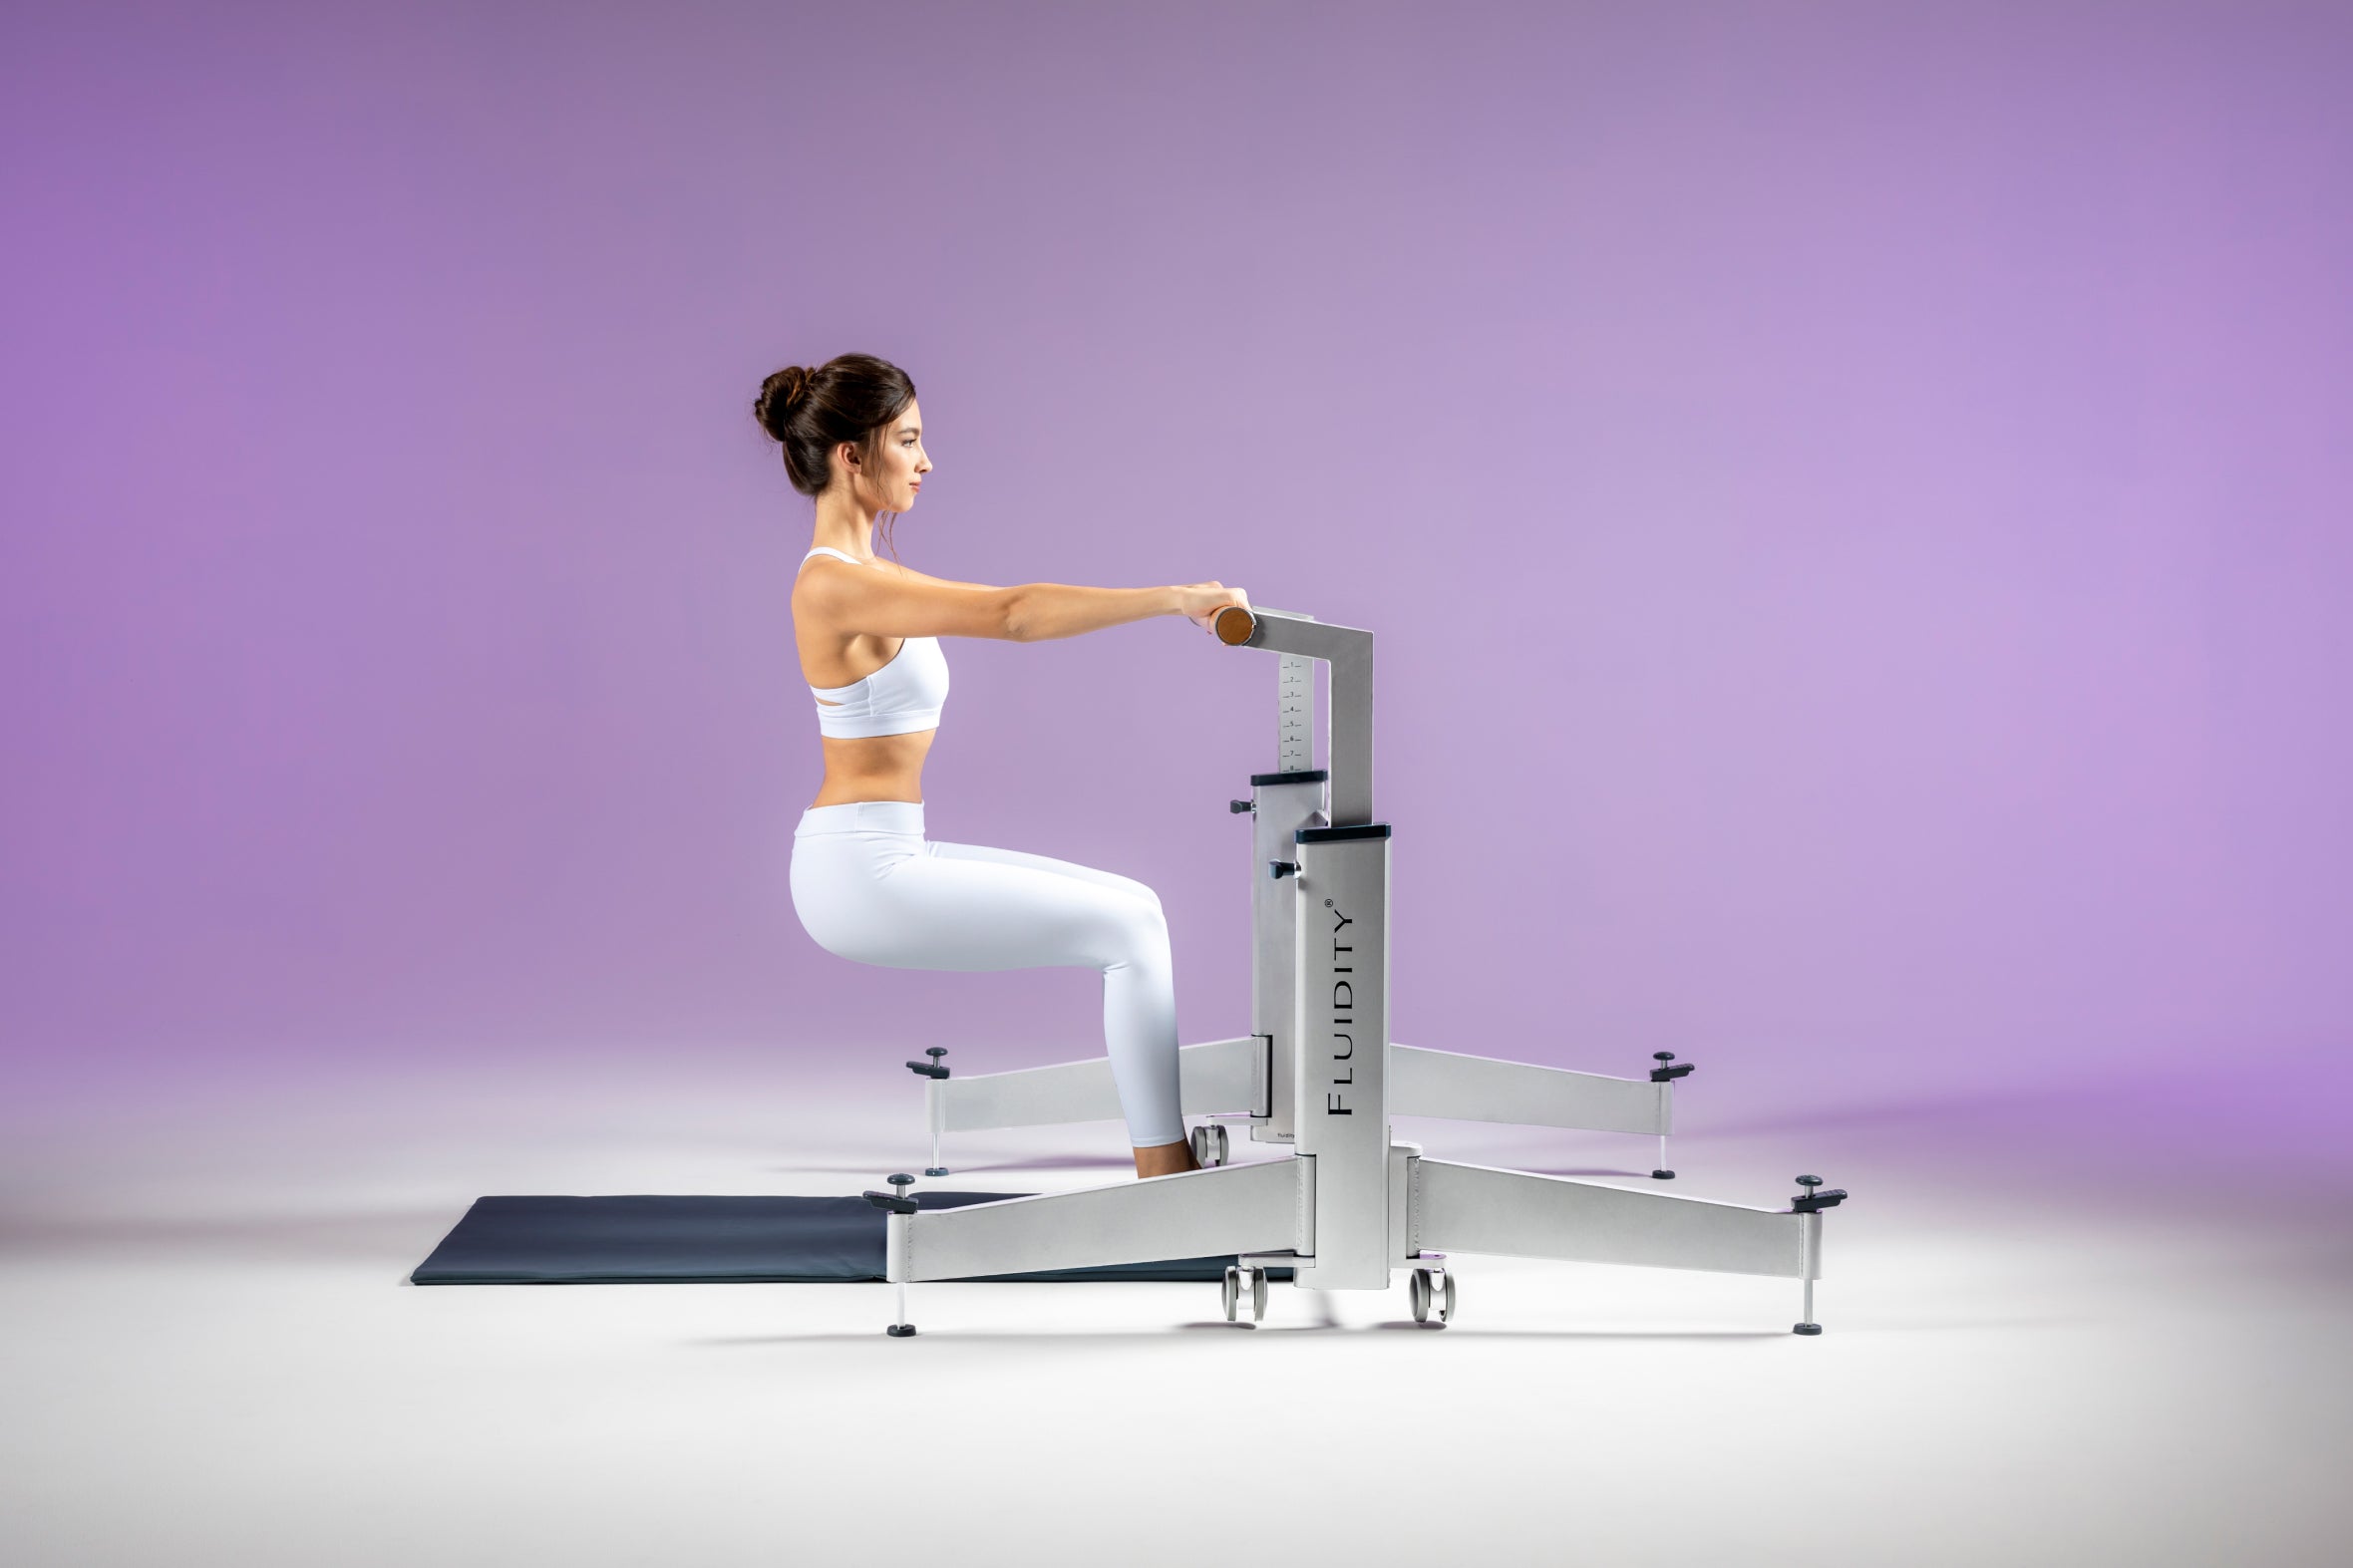 The Deluxe Fluidity Stability Home Barre System